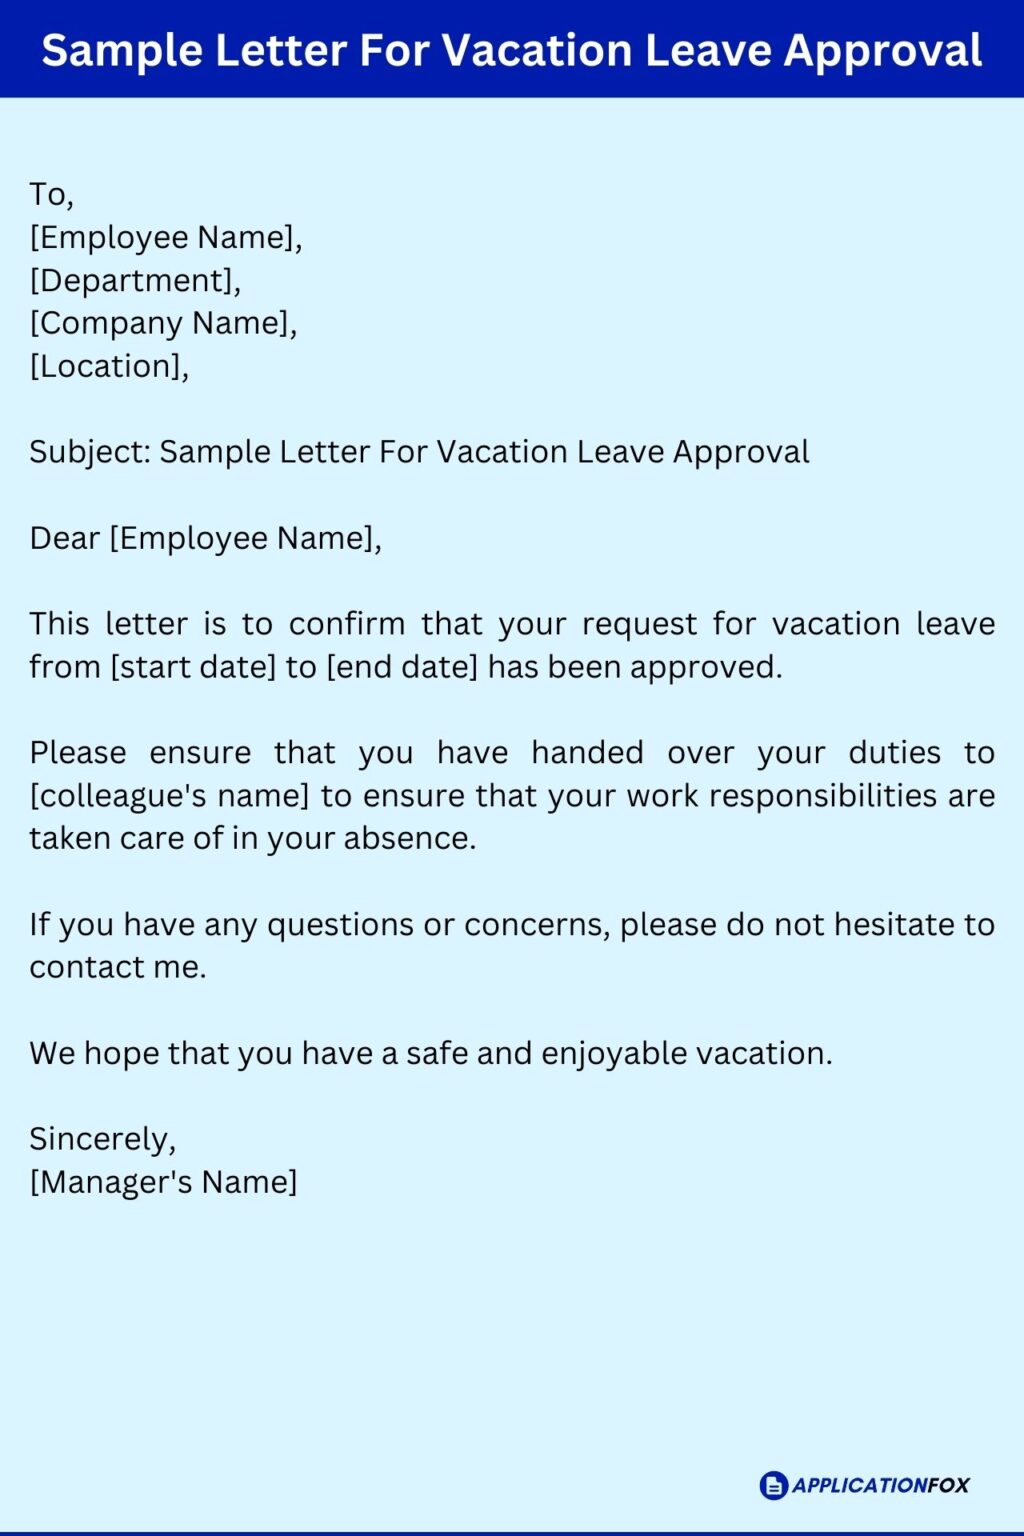 Sample Letter For Vacation Leave Approval 1024x1536 